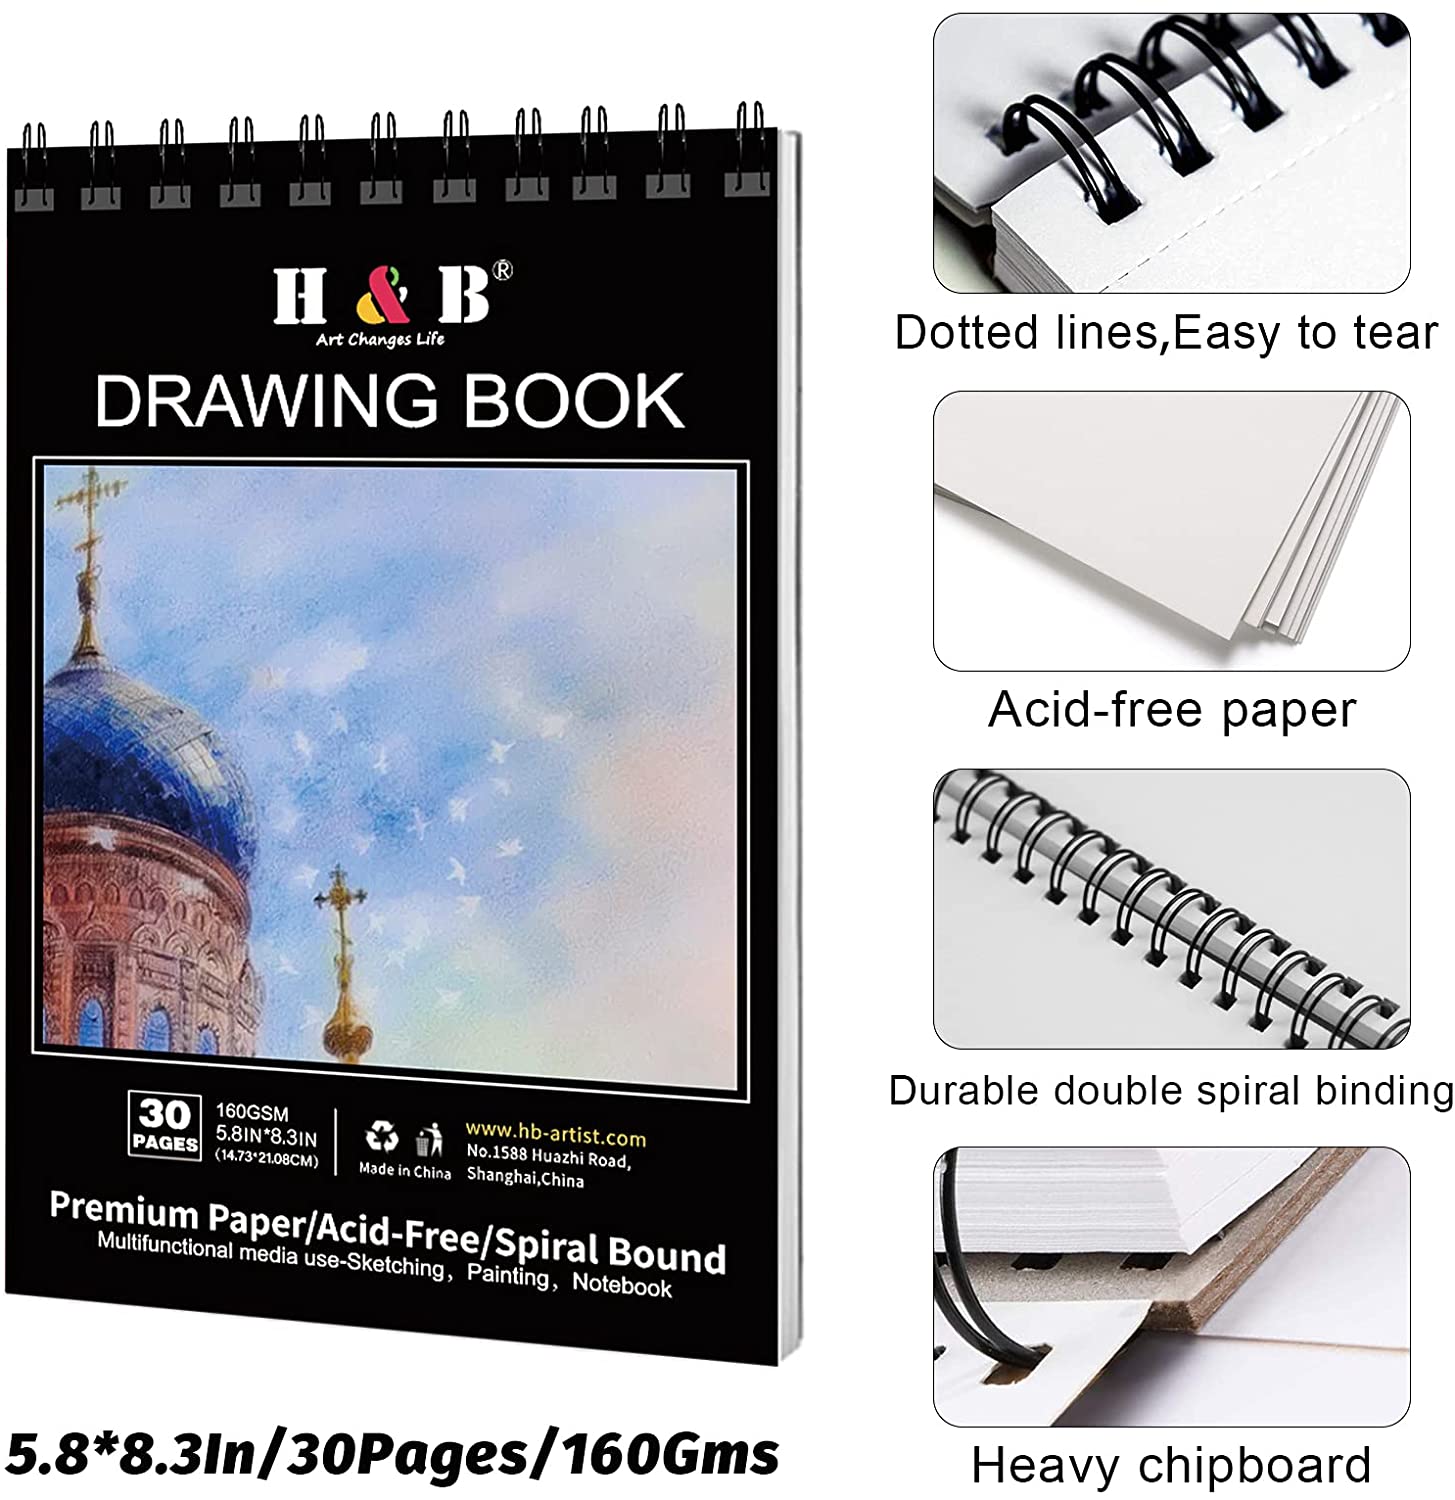 H&B Professional Coloured Pencil Set drawing book